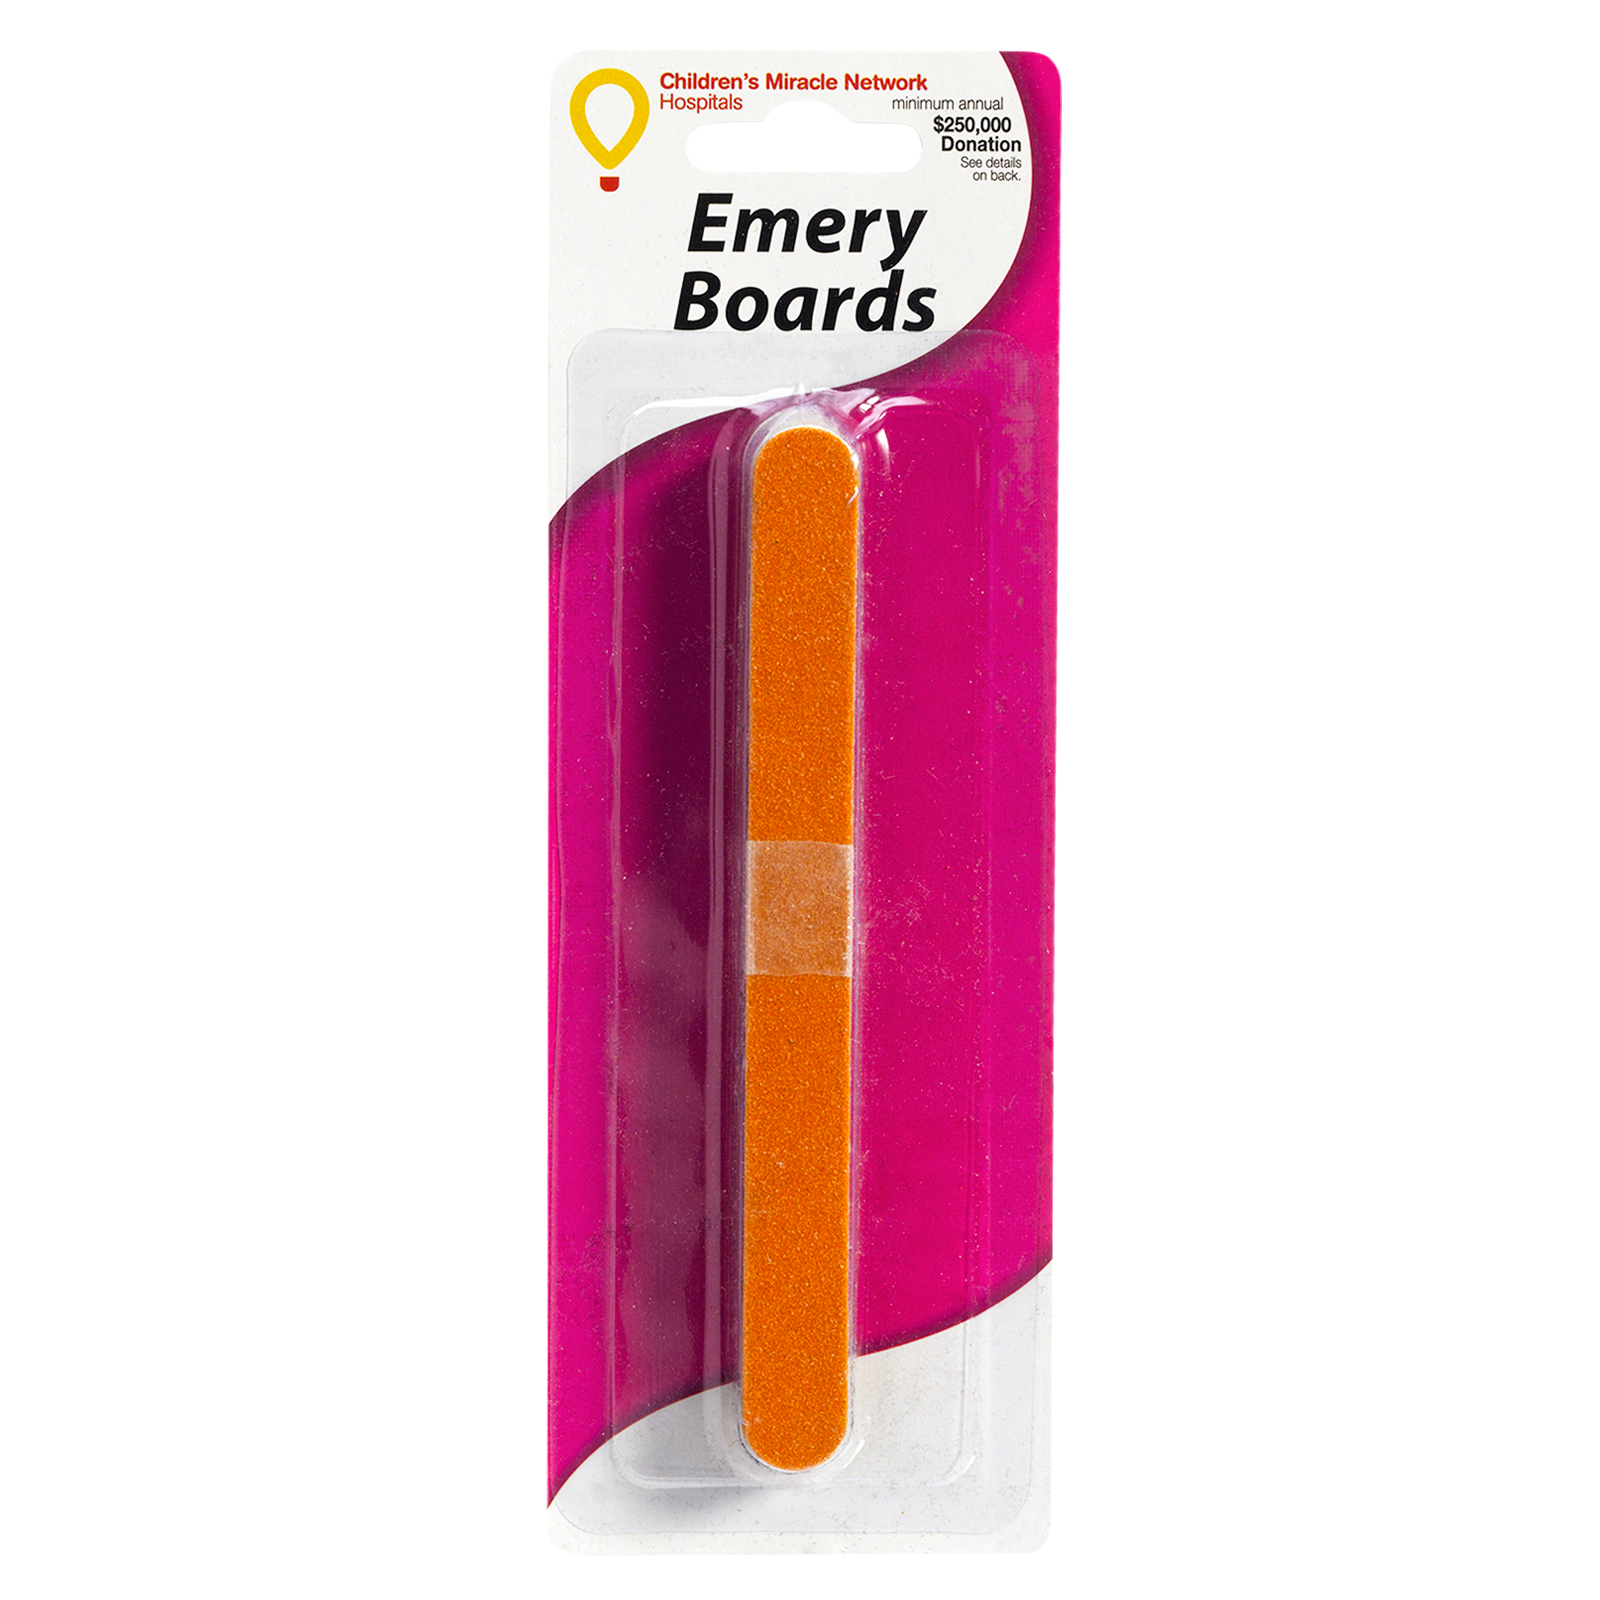 Emery Boards 10ct